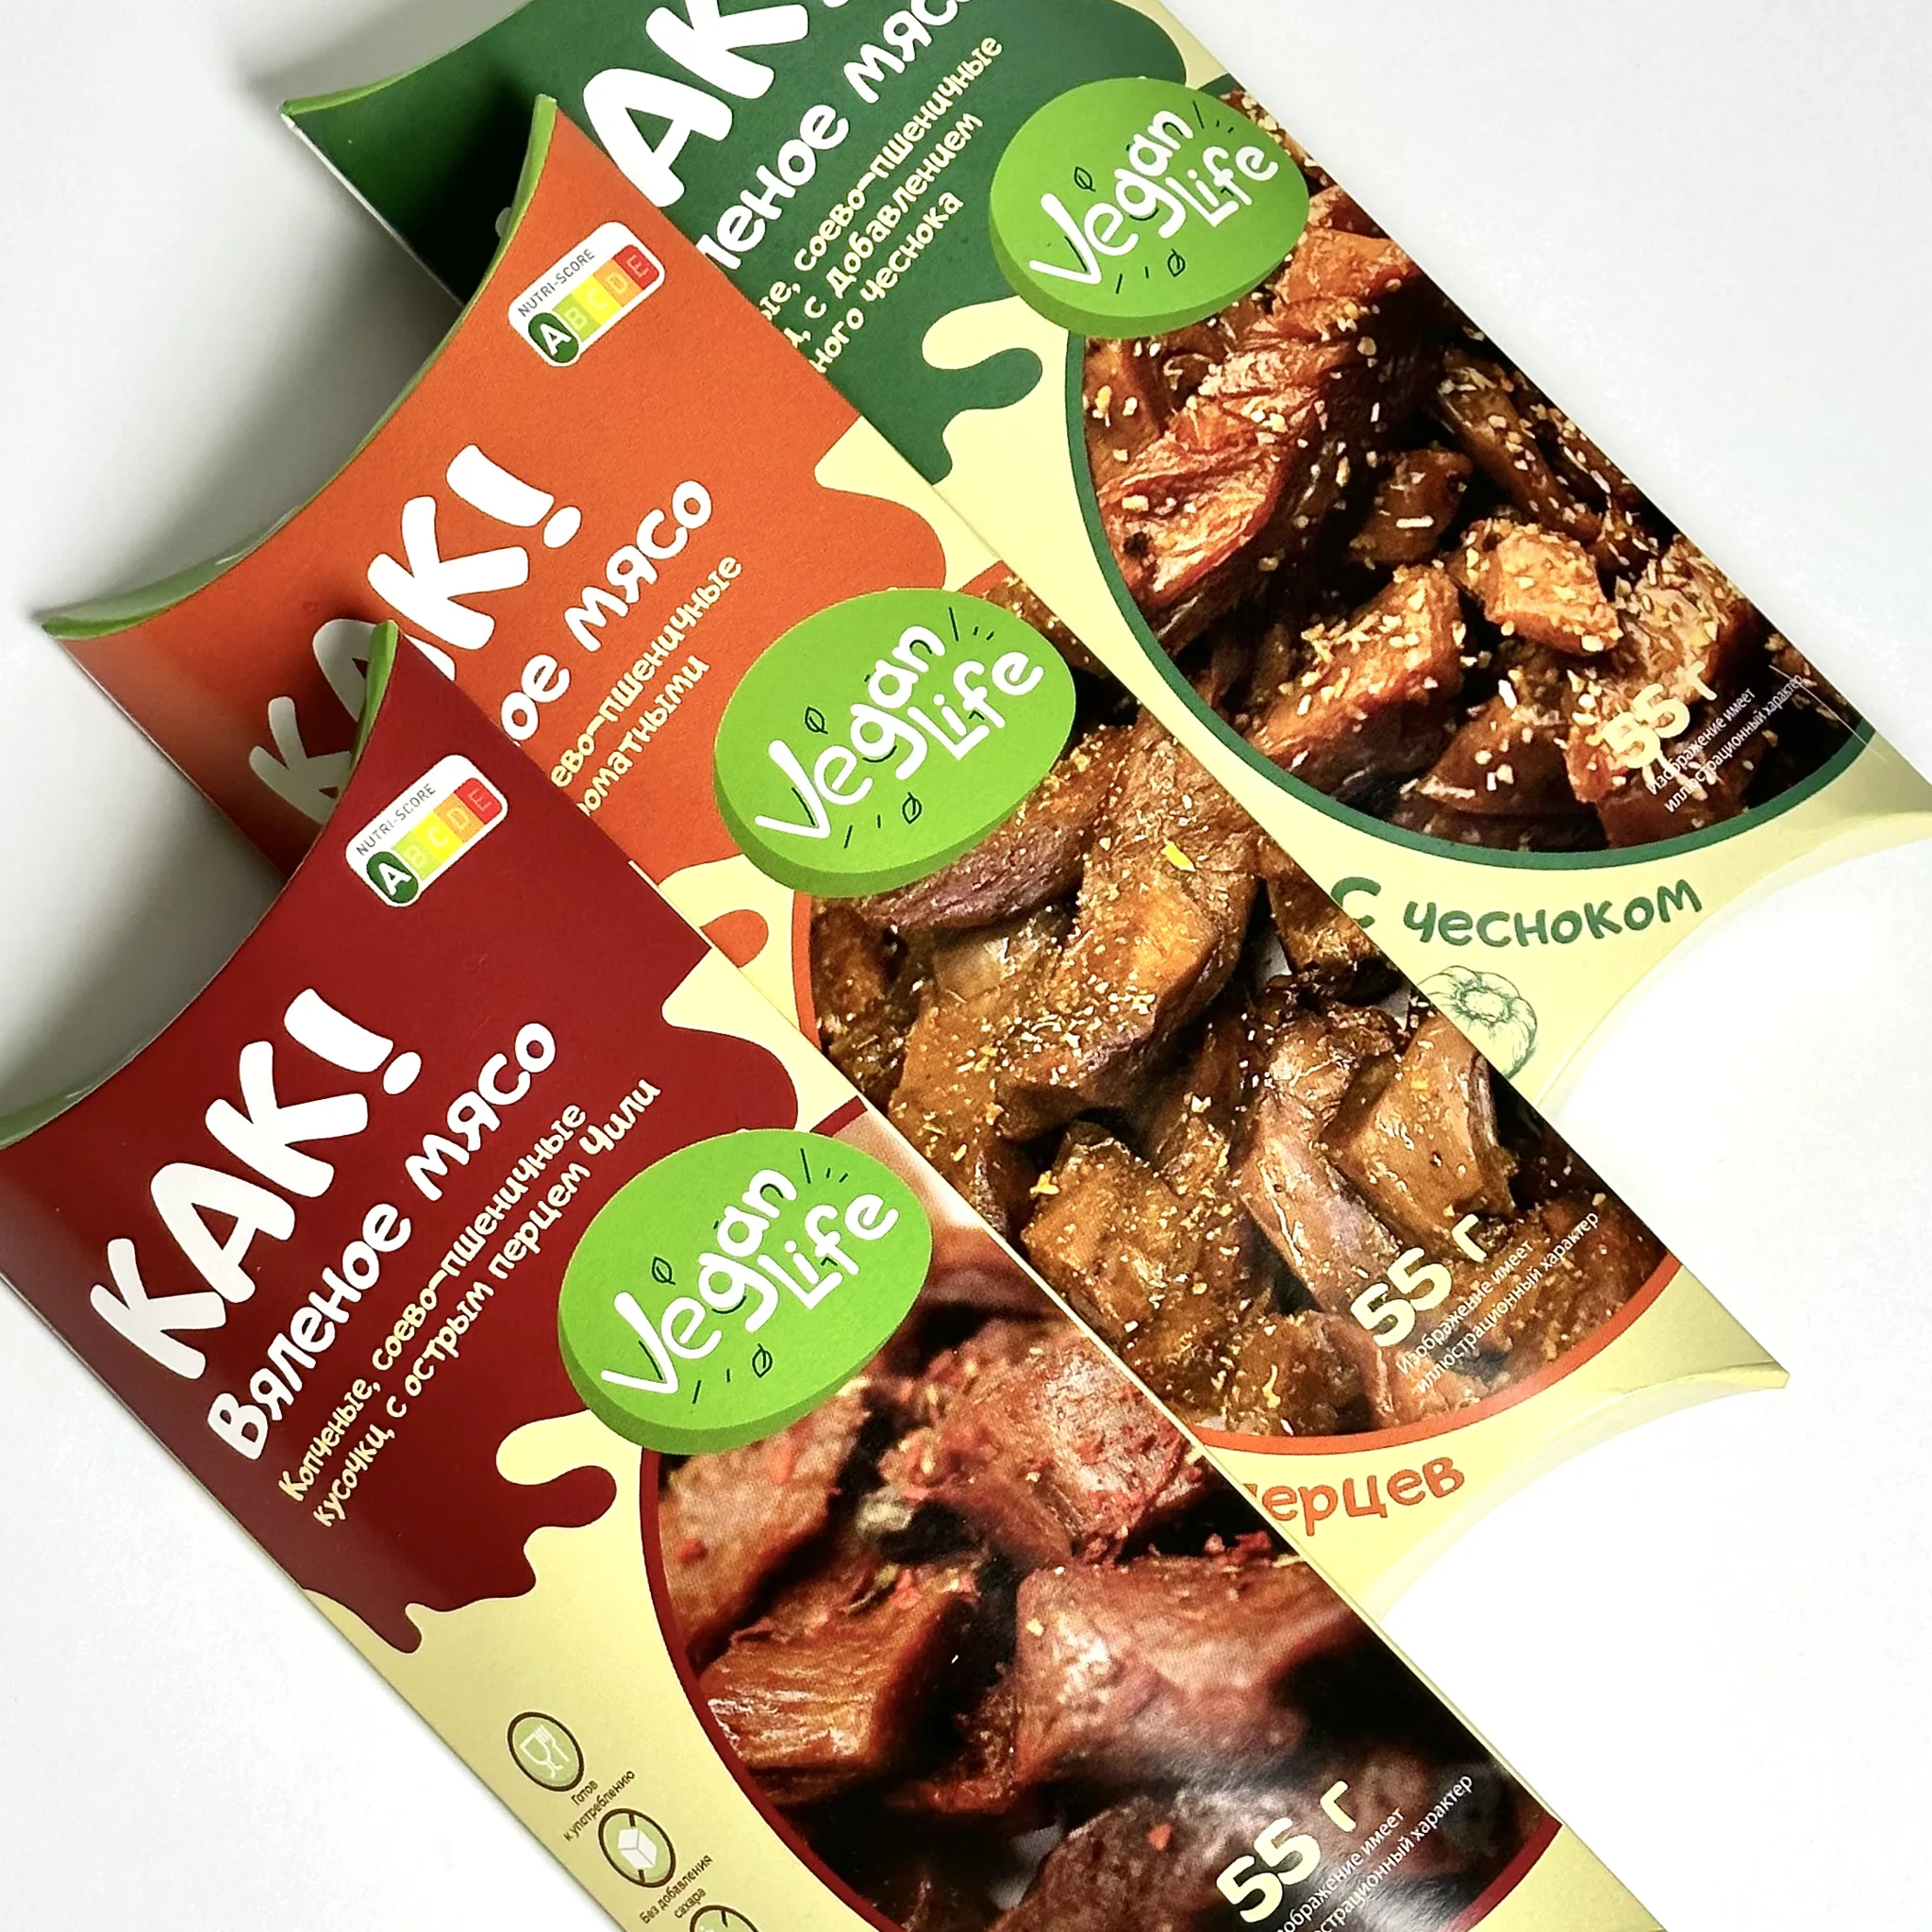 AS DRIED MEAT with spices (55 g)